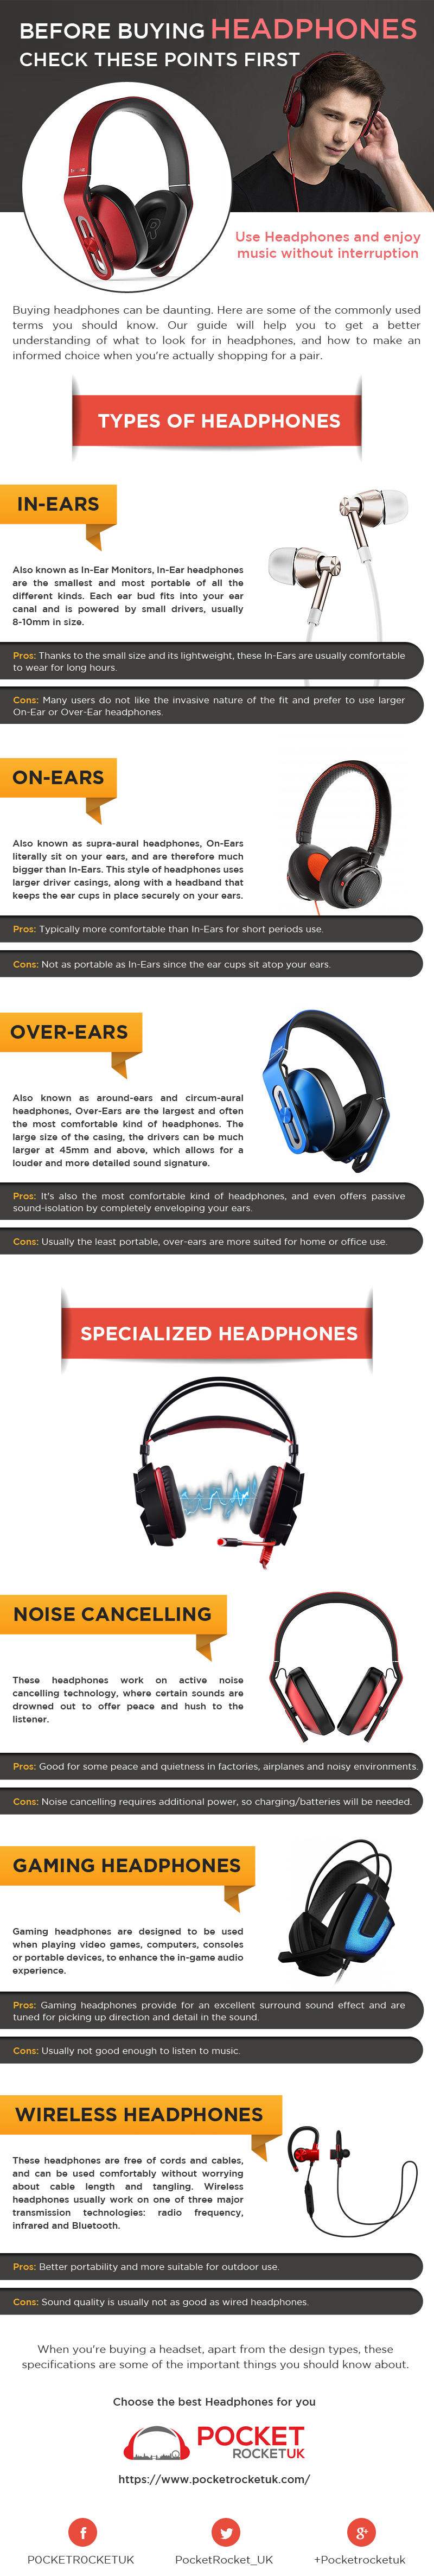 Before Buying Headphones Check These Points First